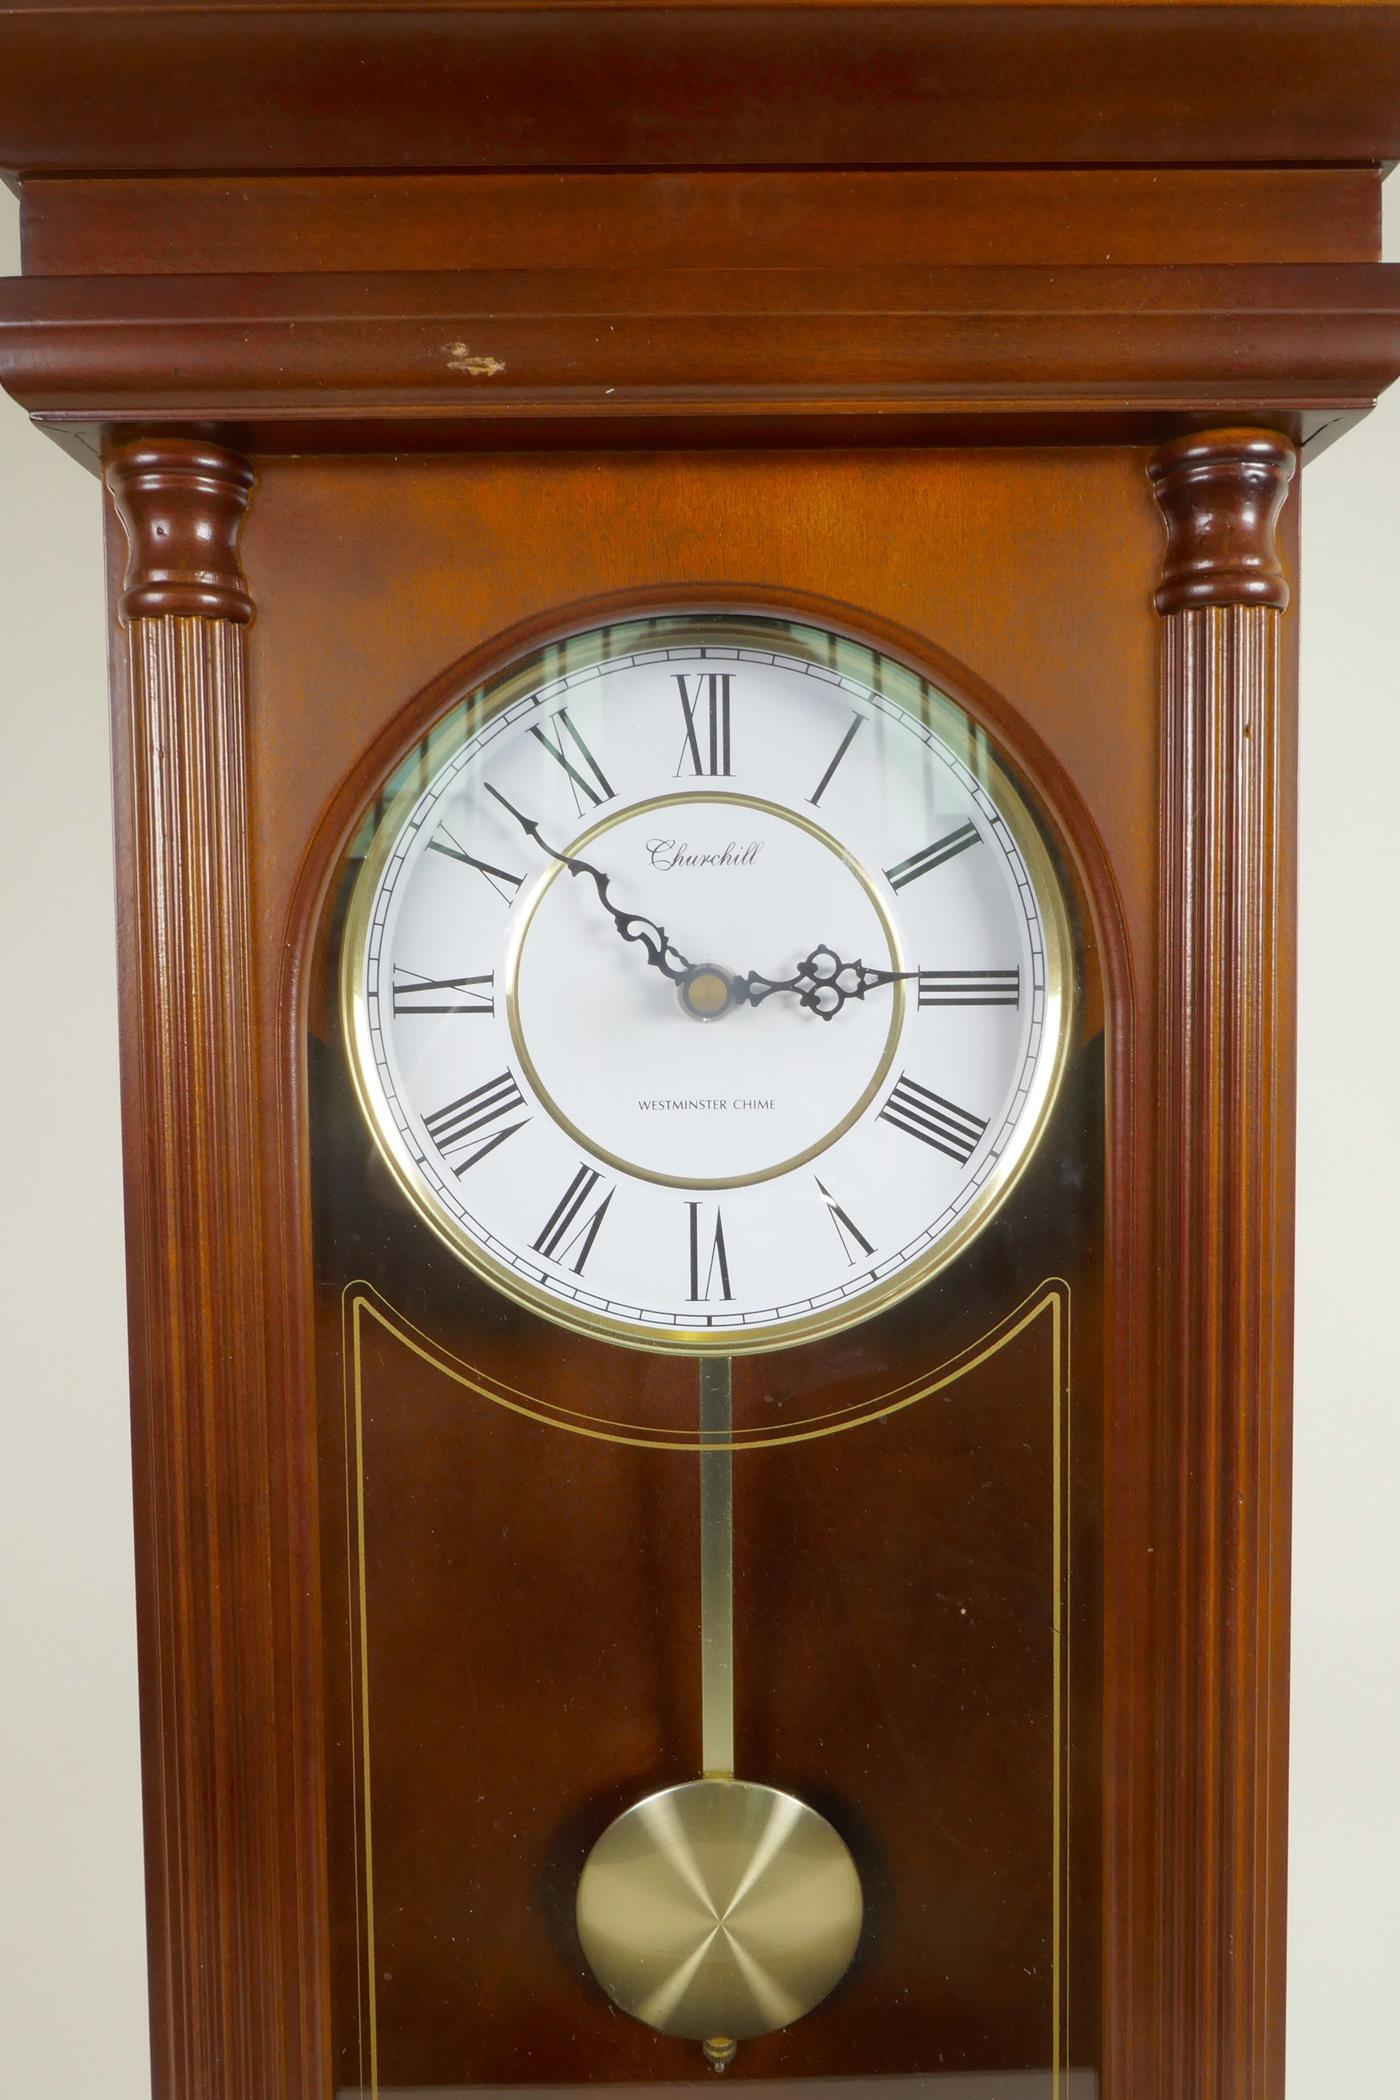 A mid C20th Smith's Enfield chiming mantel clock, dark wood effect bakelite casing and silver - Image 3 of 7